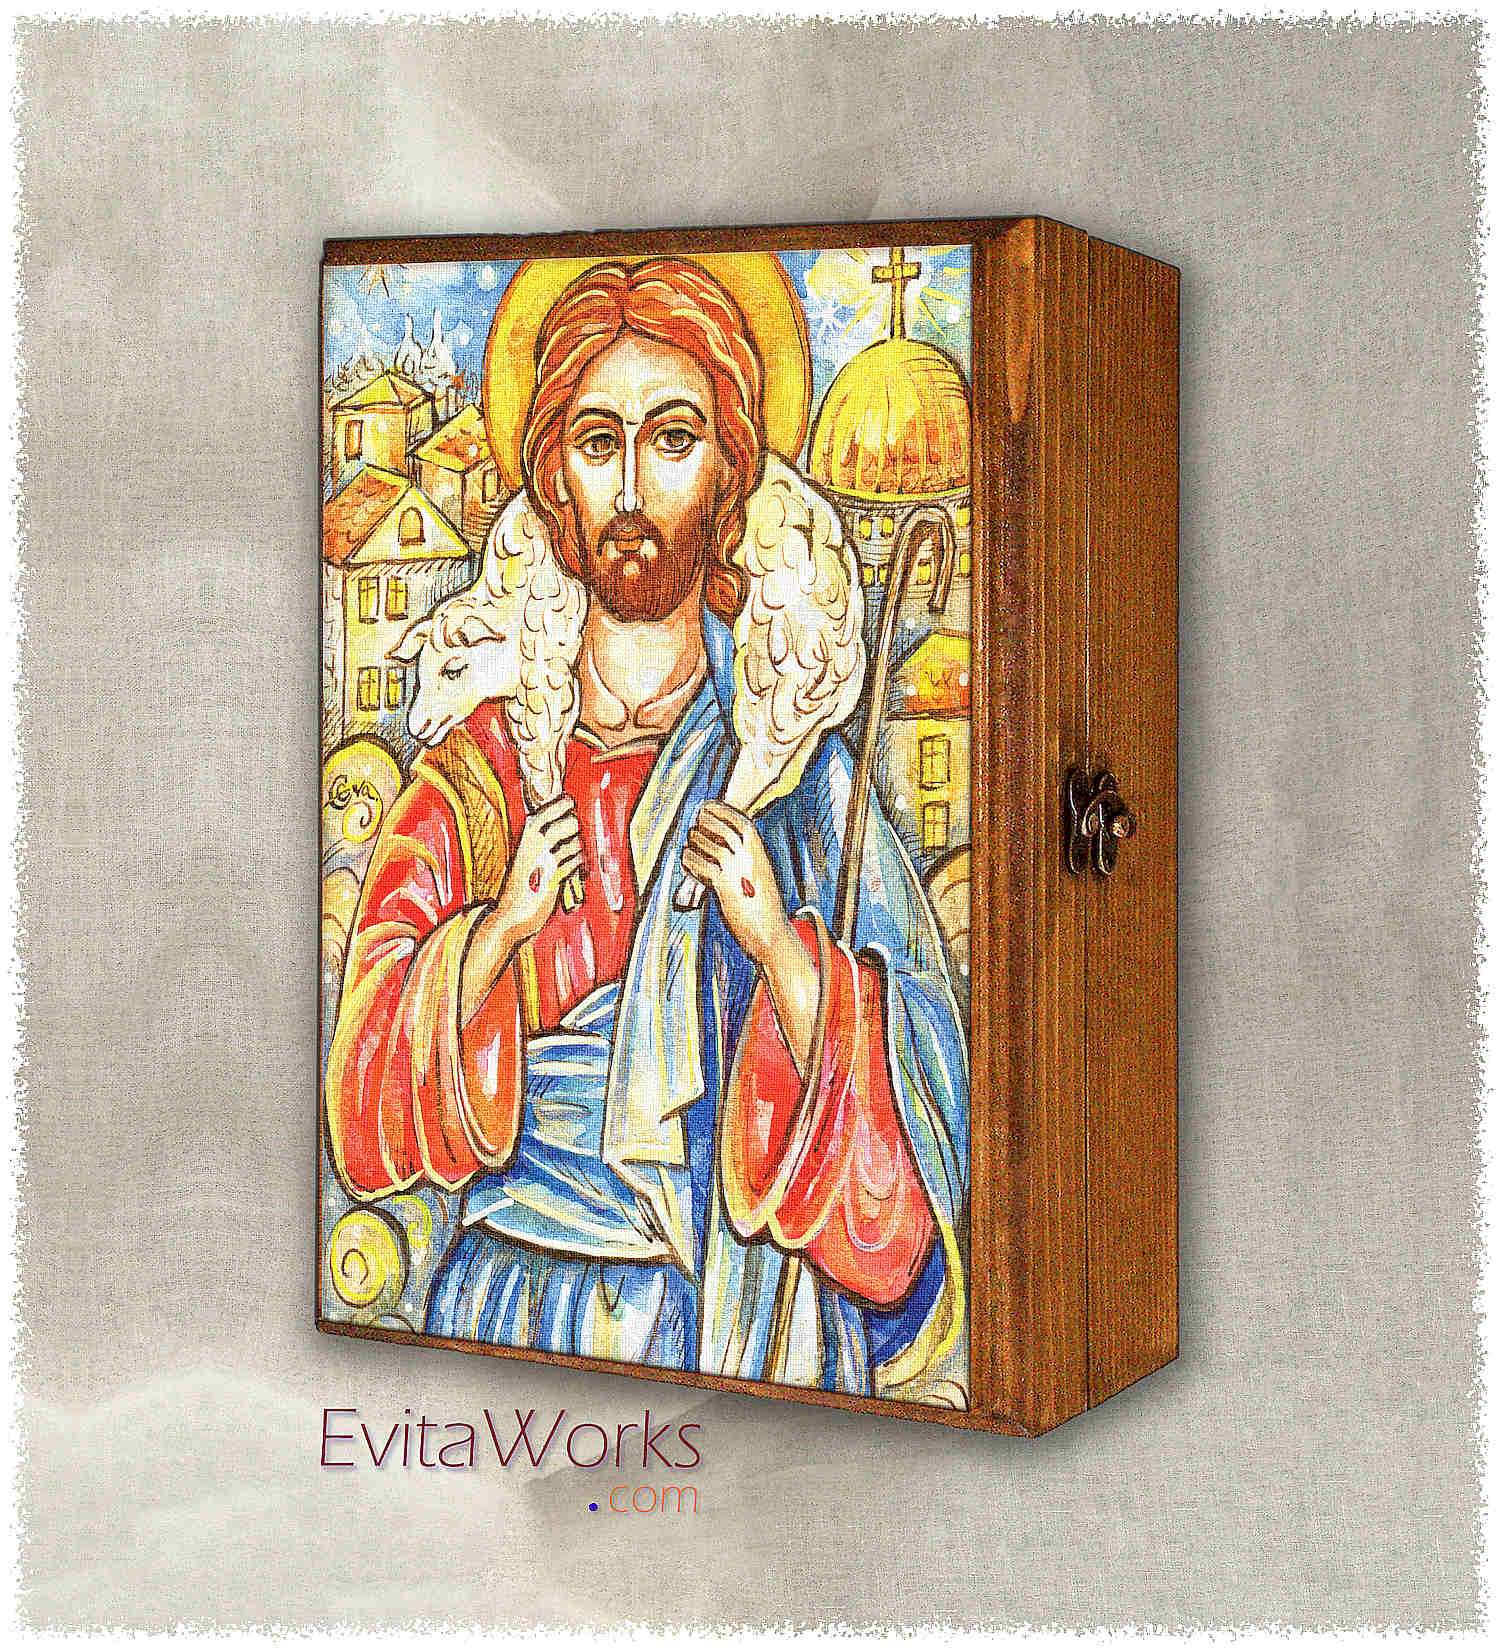 Hit to learn about "Christ 01, Christmas art" on jewelboxes